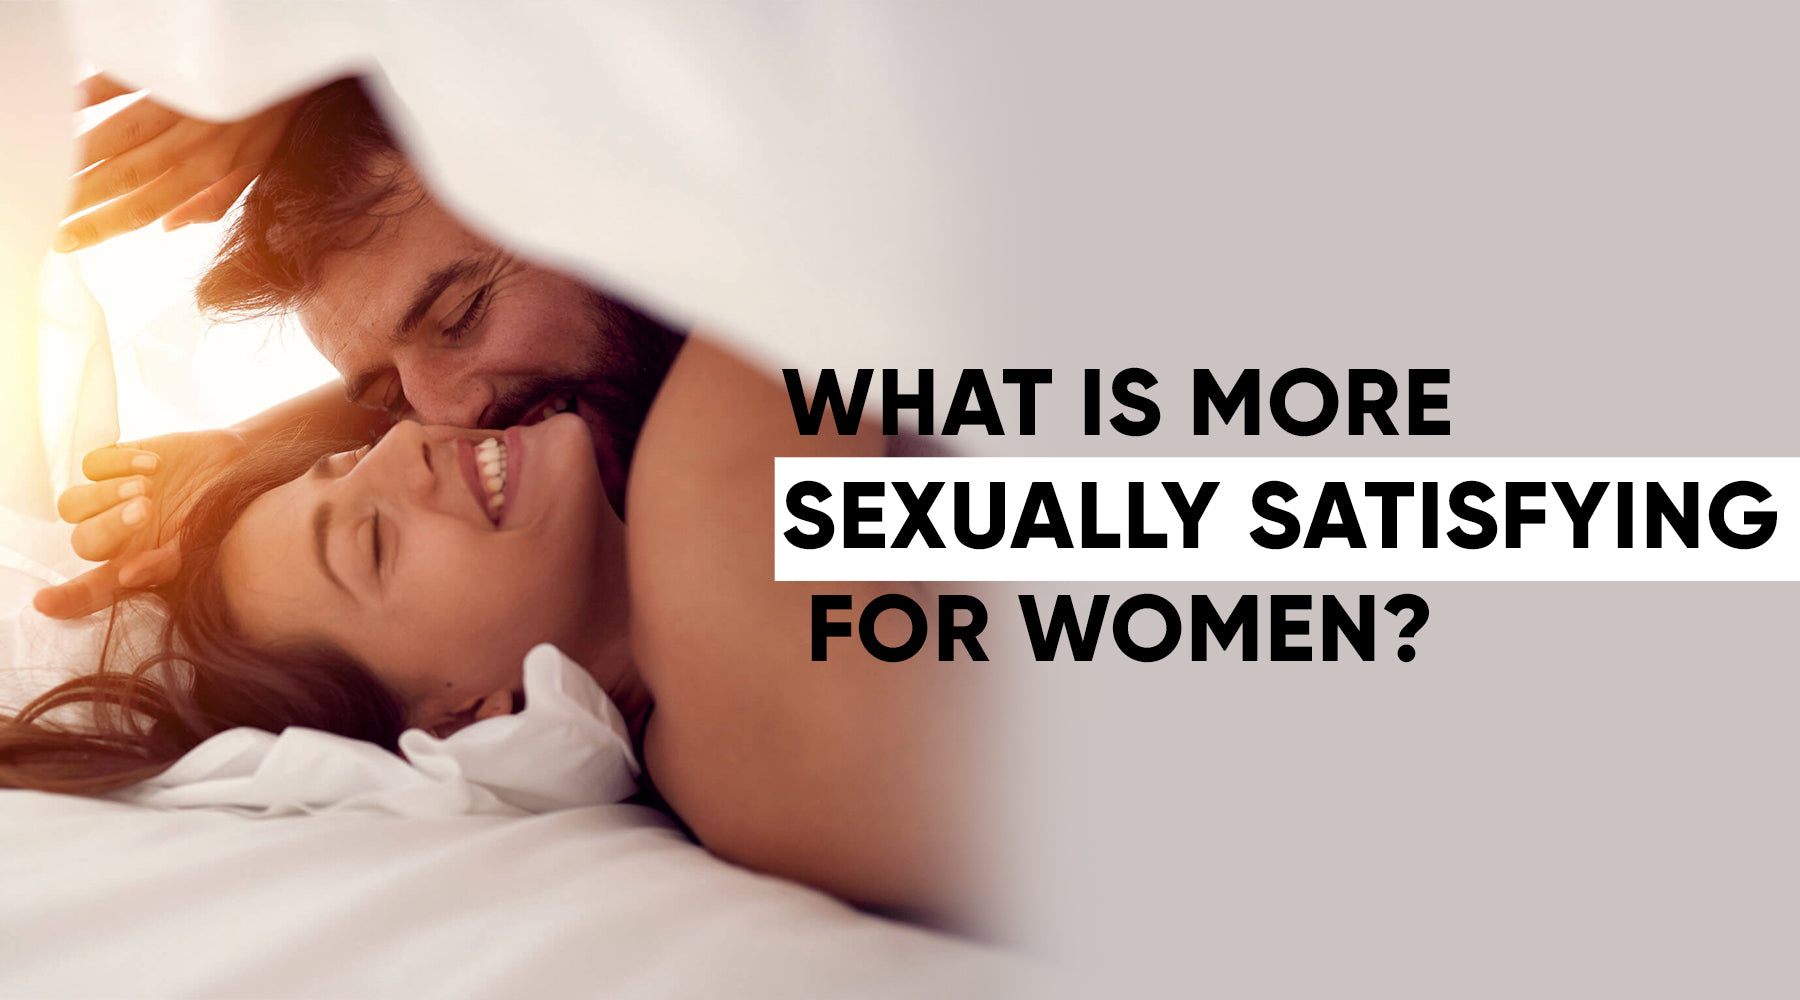 What Is More Sexually Satisfying For Women?